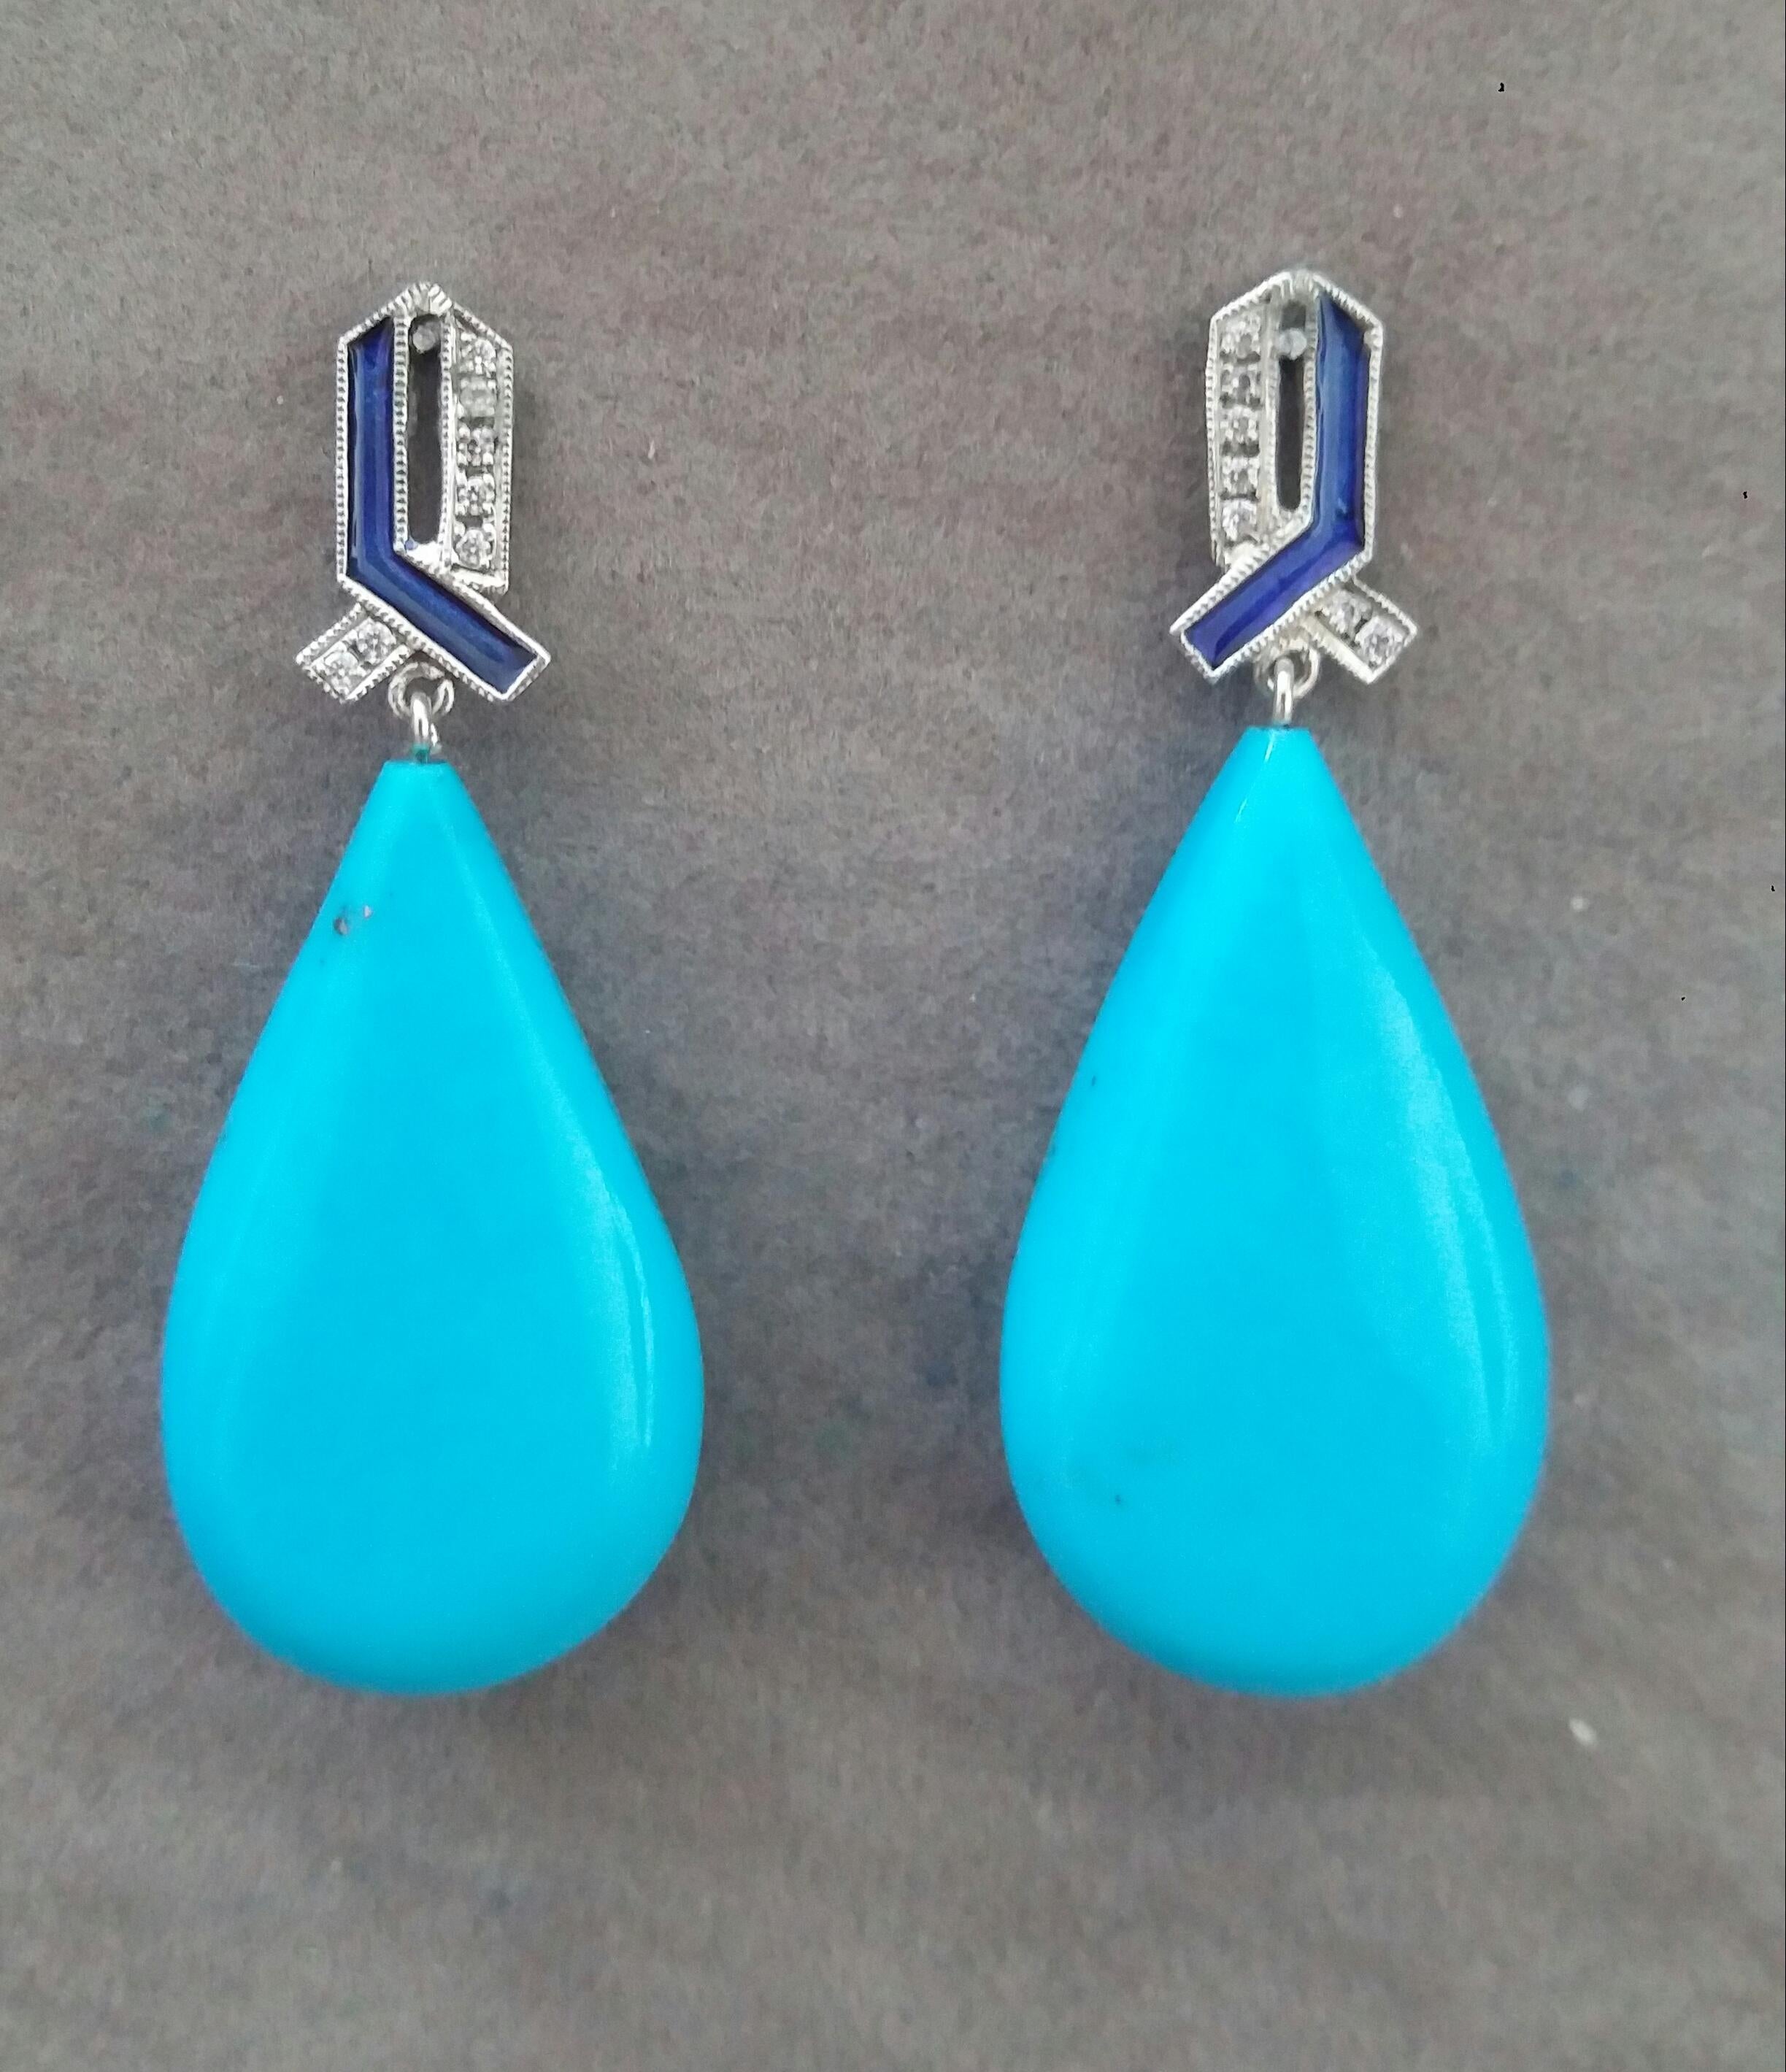 In these Art Deco Style handmade earrings 2  good quality Natural Turquoise plain drops measuring 17 x 30 mm. are suspended from 2 white 14 kt gold elements tops  with 16 full cut round diamonds and blue Enamels.
These earrings will arrive at your